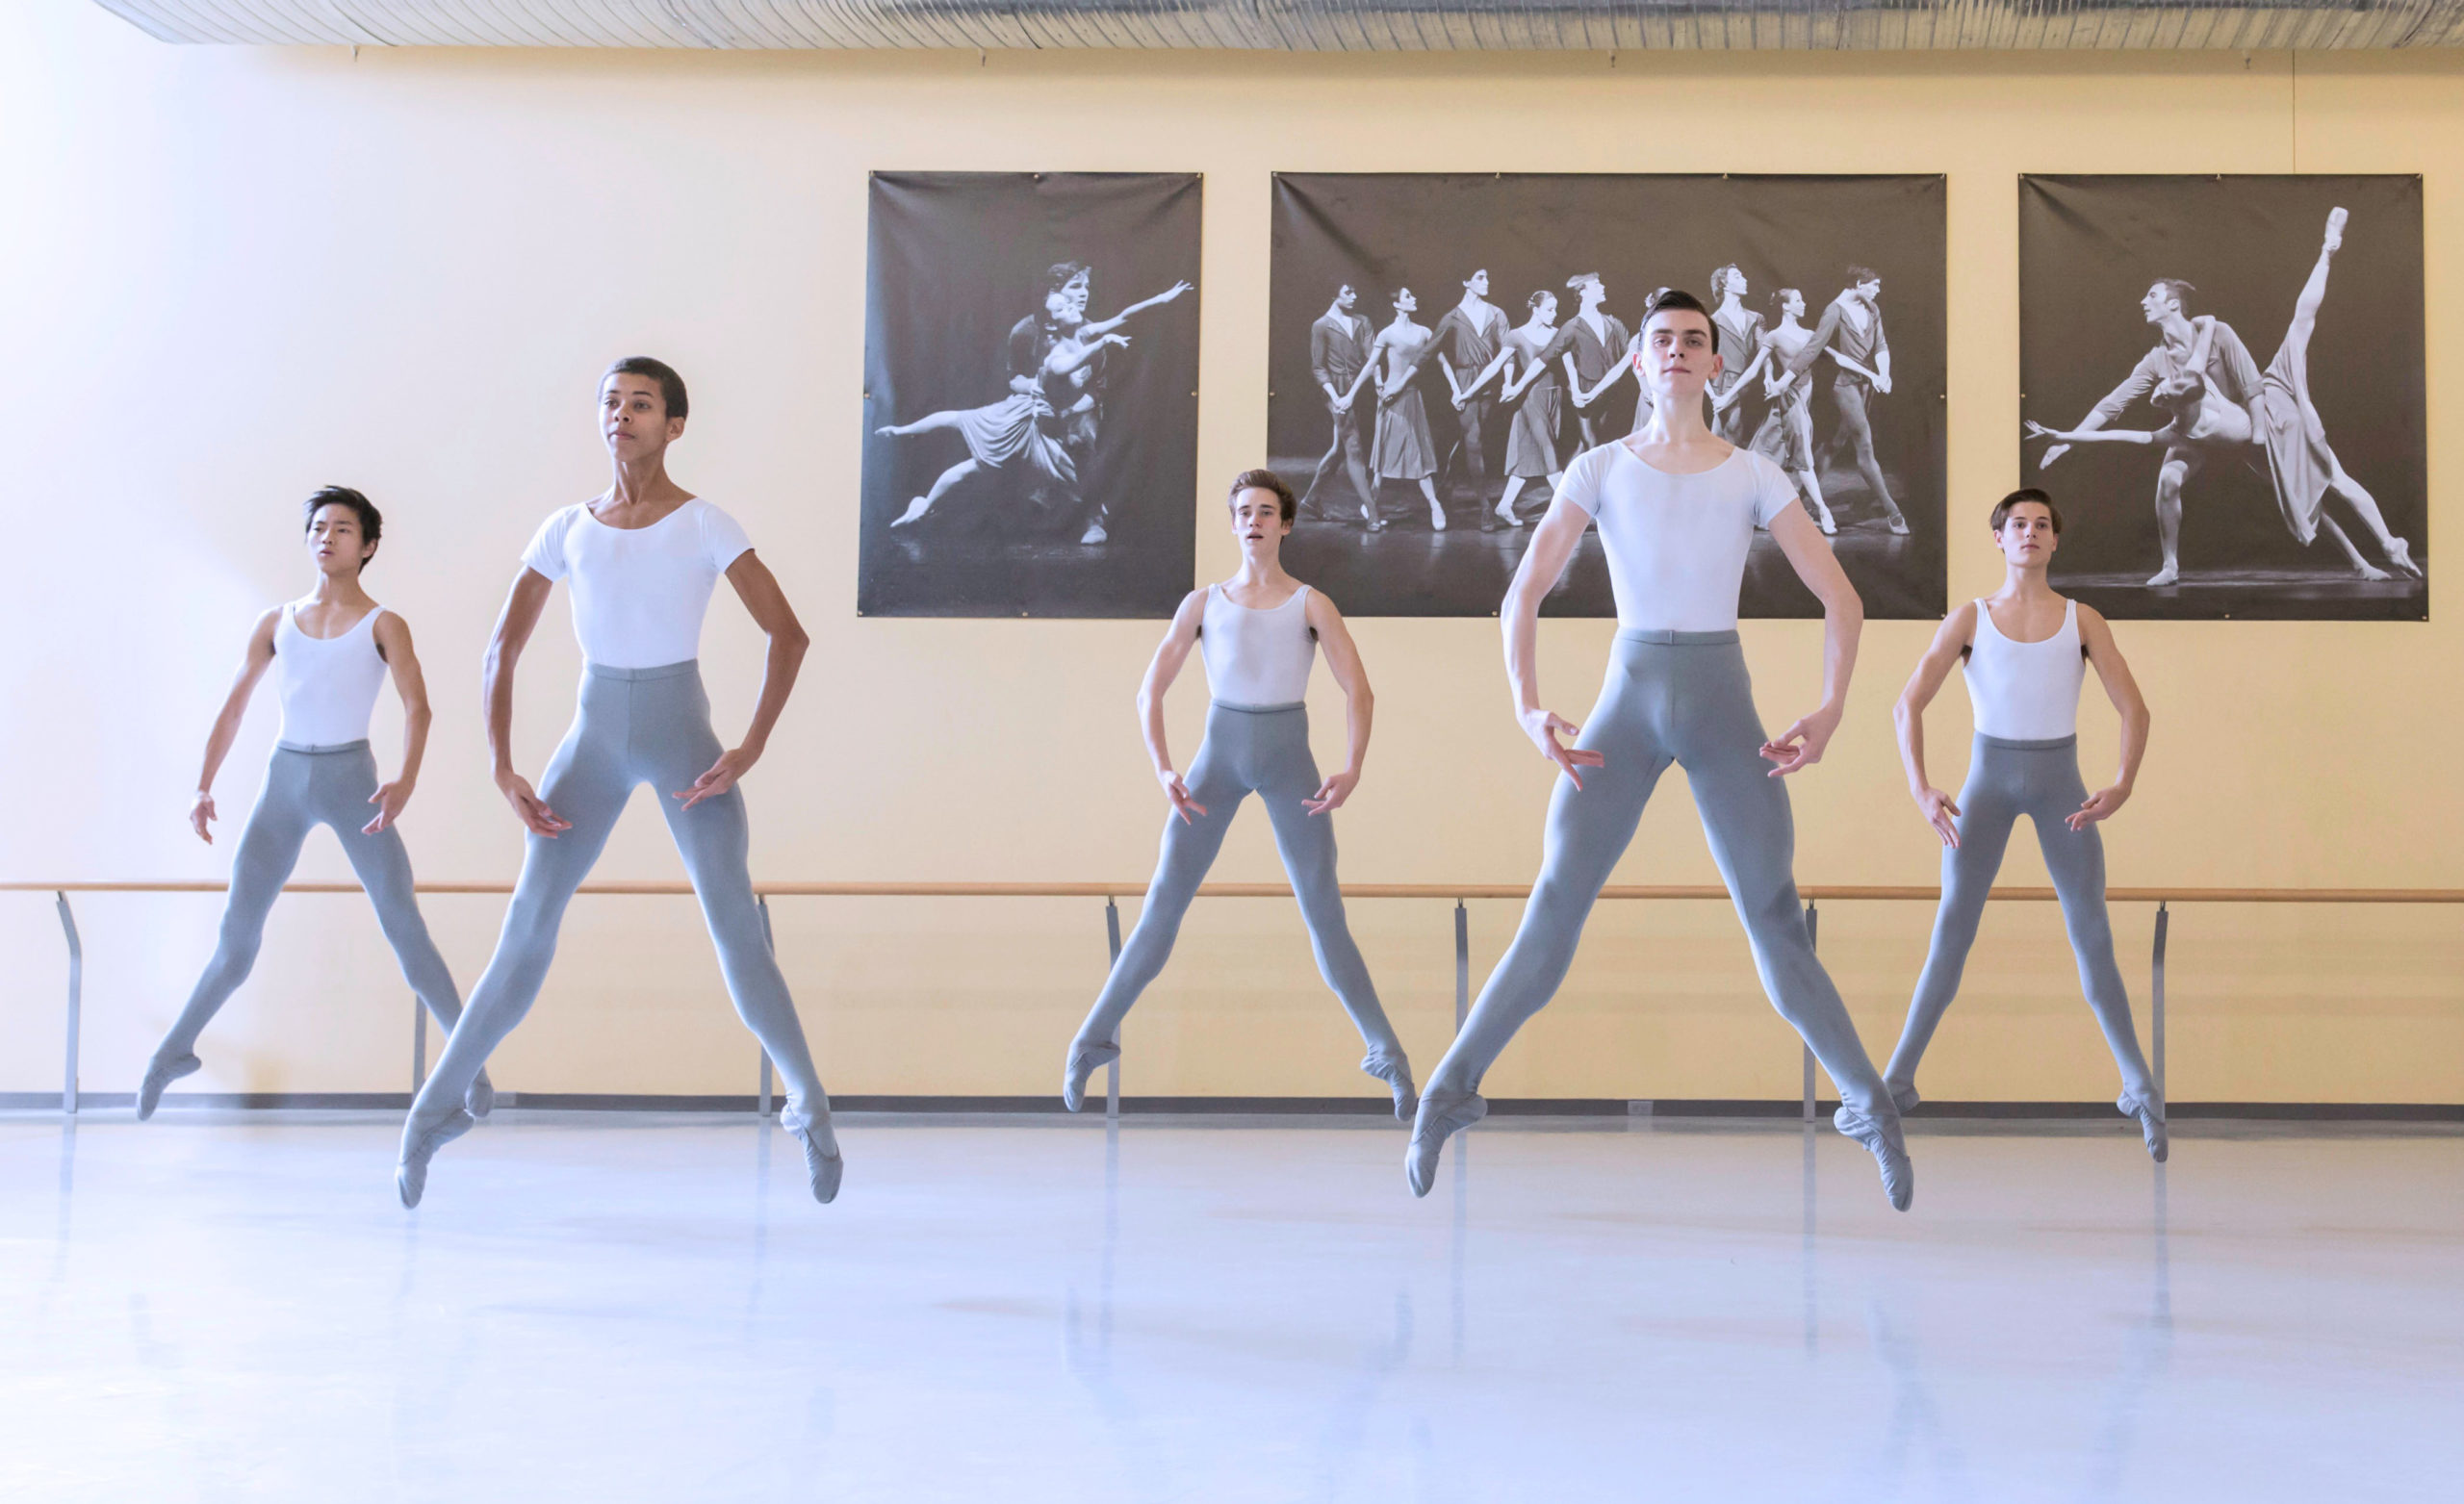 In a large dance studio, five male teenage ballet students wearing white T-shirts, gray tights and gray ballet slippers practice sautés in second position in a staggered line.